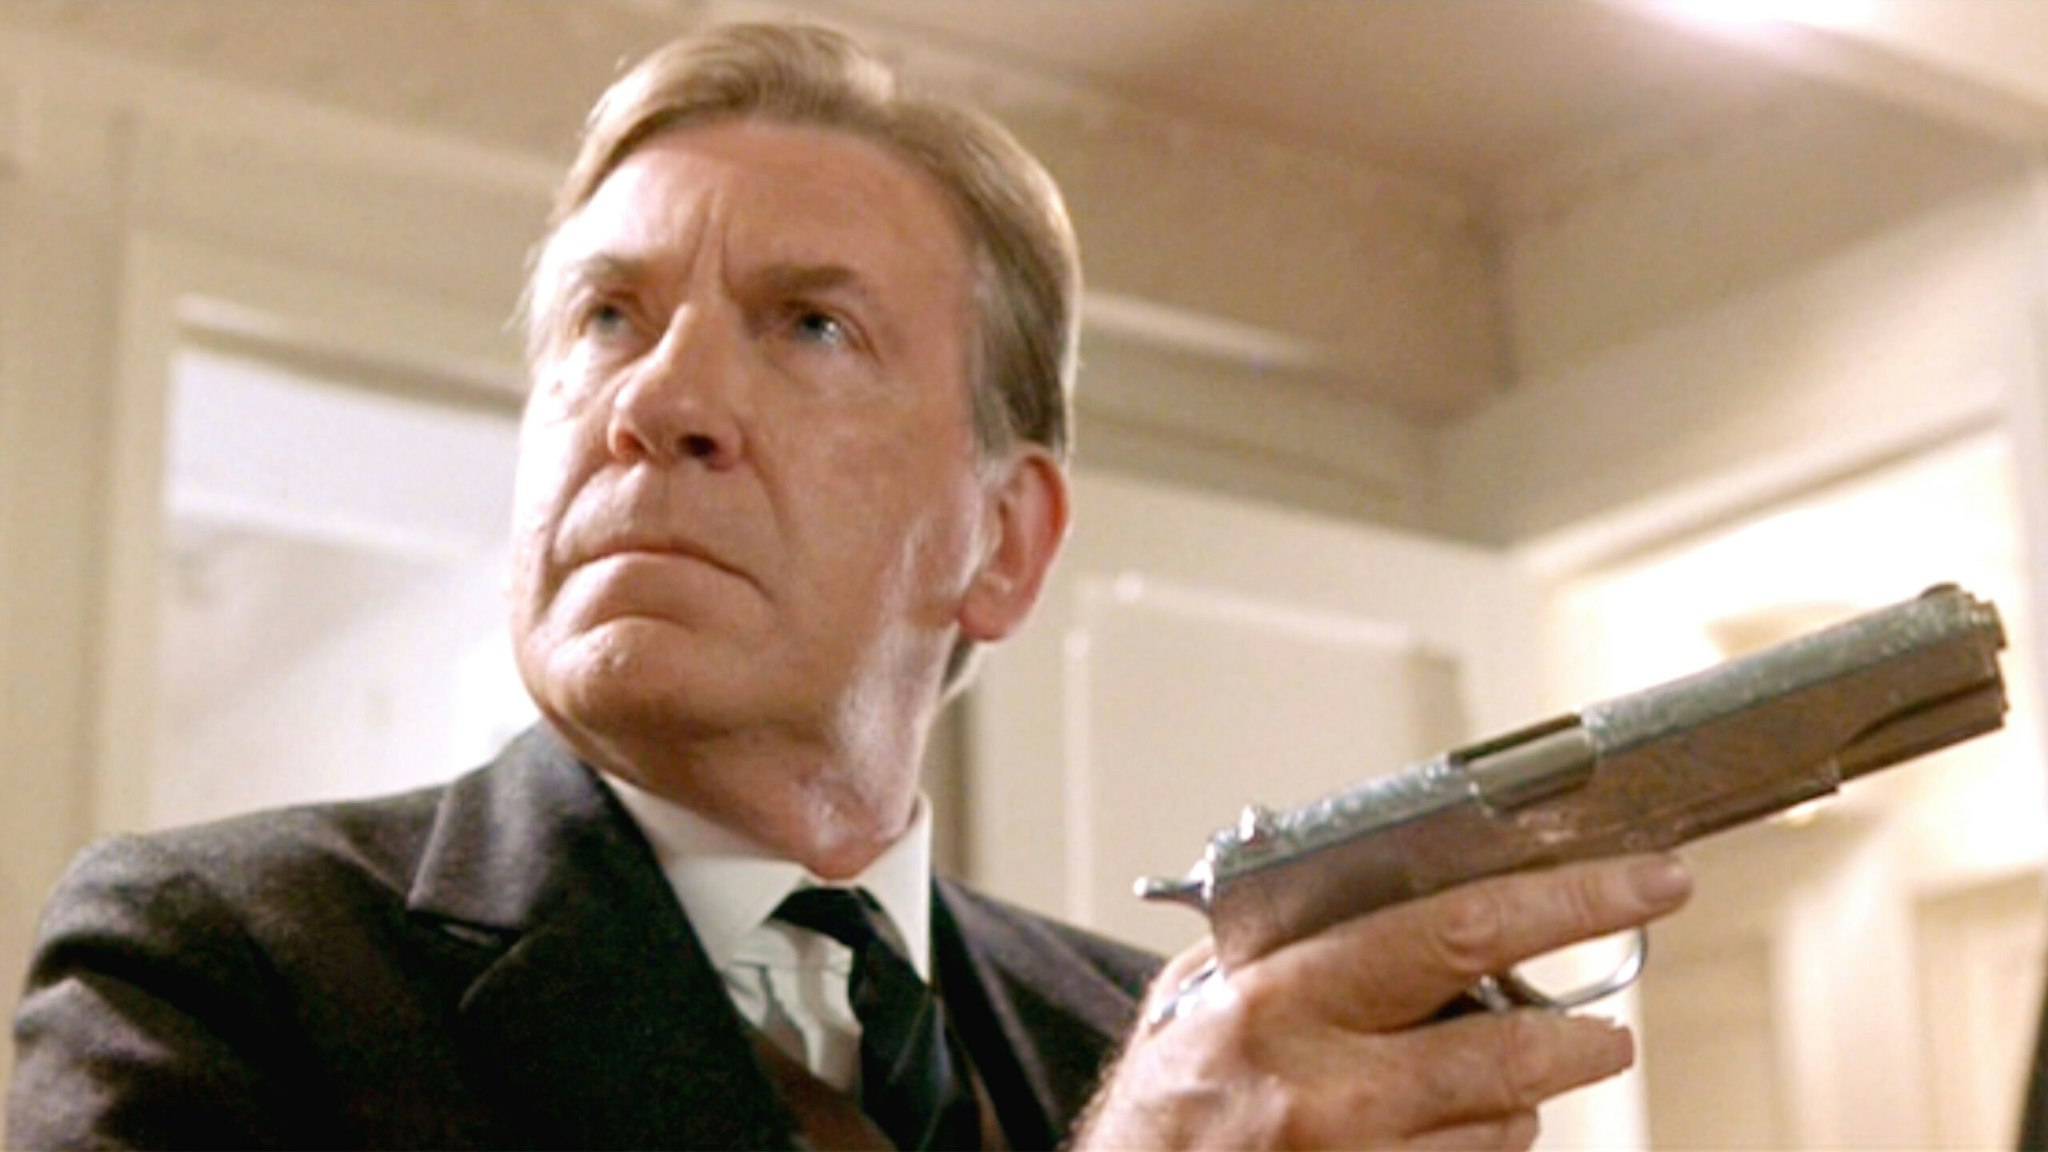 LOS ANGELES - DECEMBER 19: The movie "Titanic", written and directed by James Cameron. Seen here, David Warner as Spicer Lovejoy with an M1911 pistol. Initial USA theatrical wide release December 19, 1997. Screen capture. Paramount Pictures.